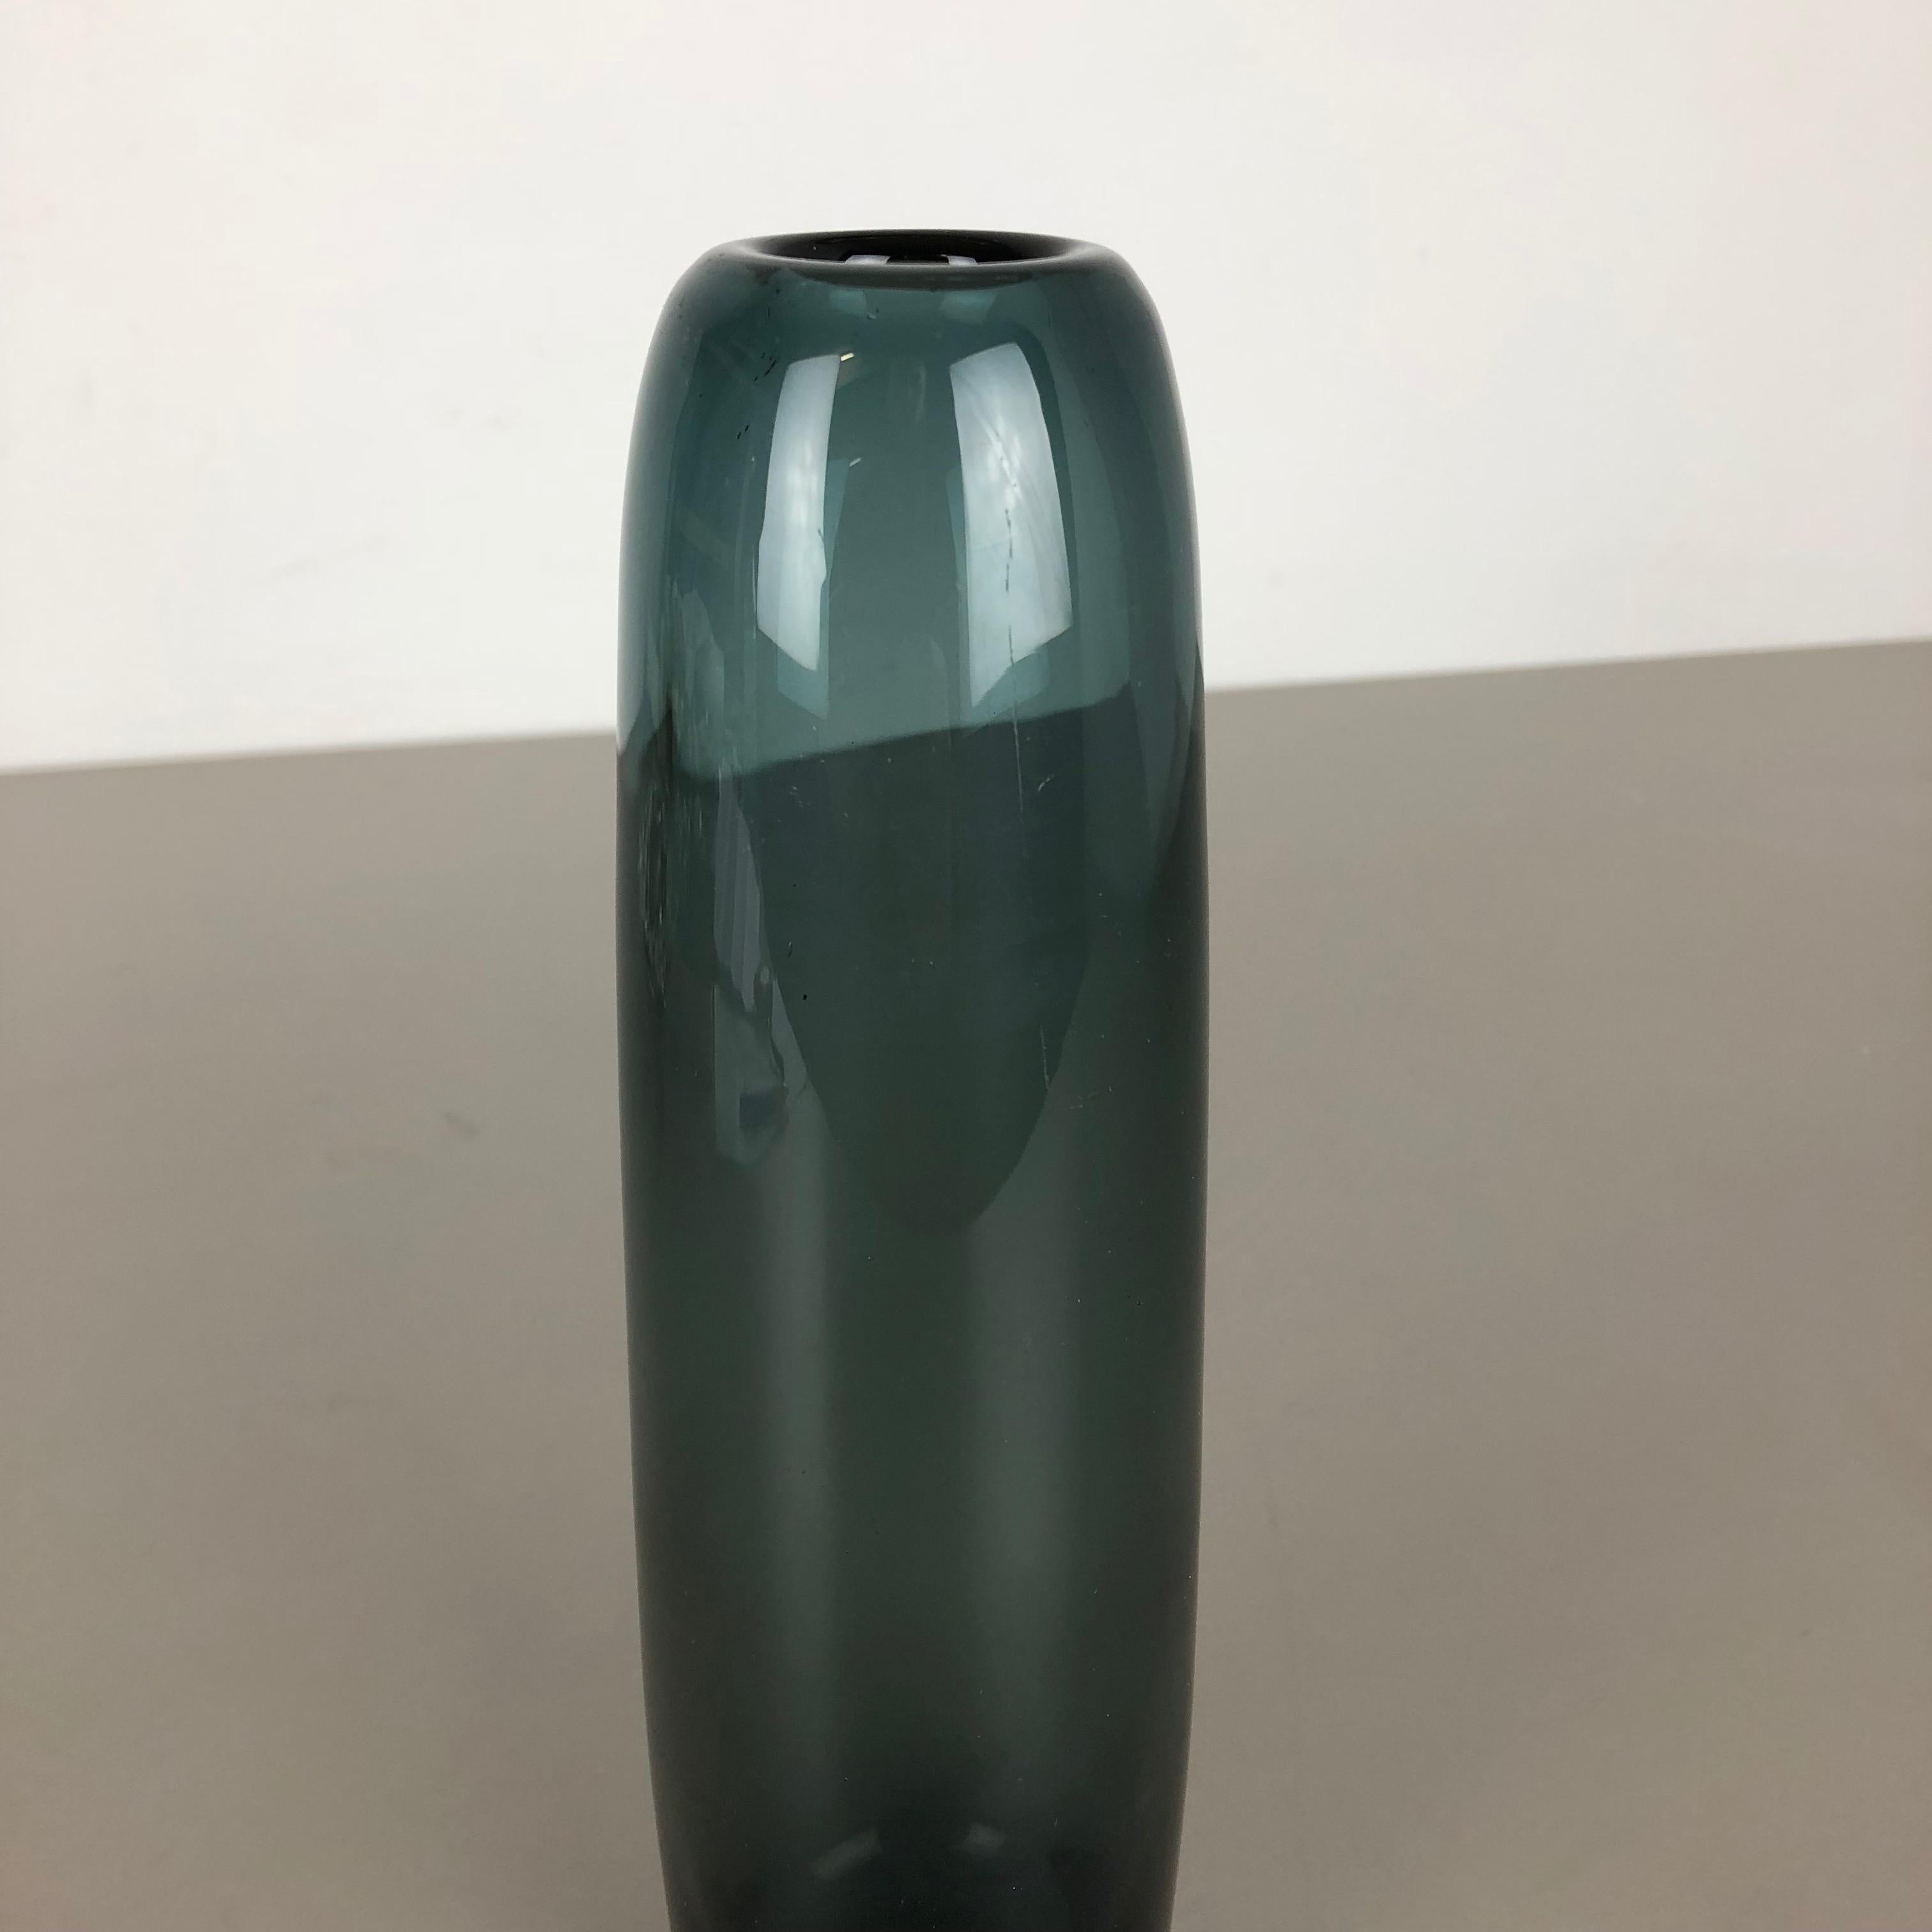 Large Vintage 1960s Turmalin Vase by Wilhelm Wagenfeld for WMF, Germany Bauhaus For Sale 3